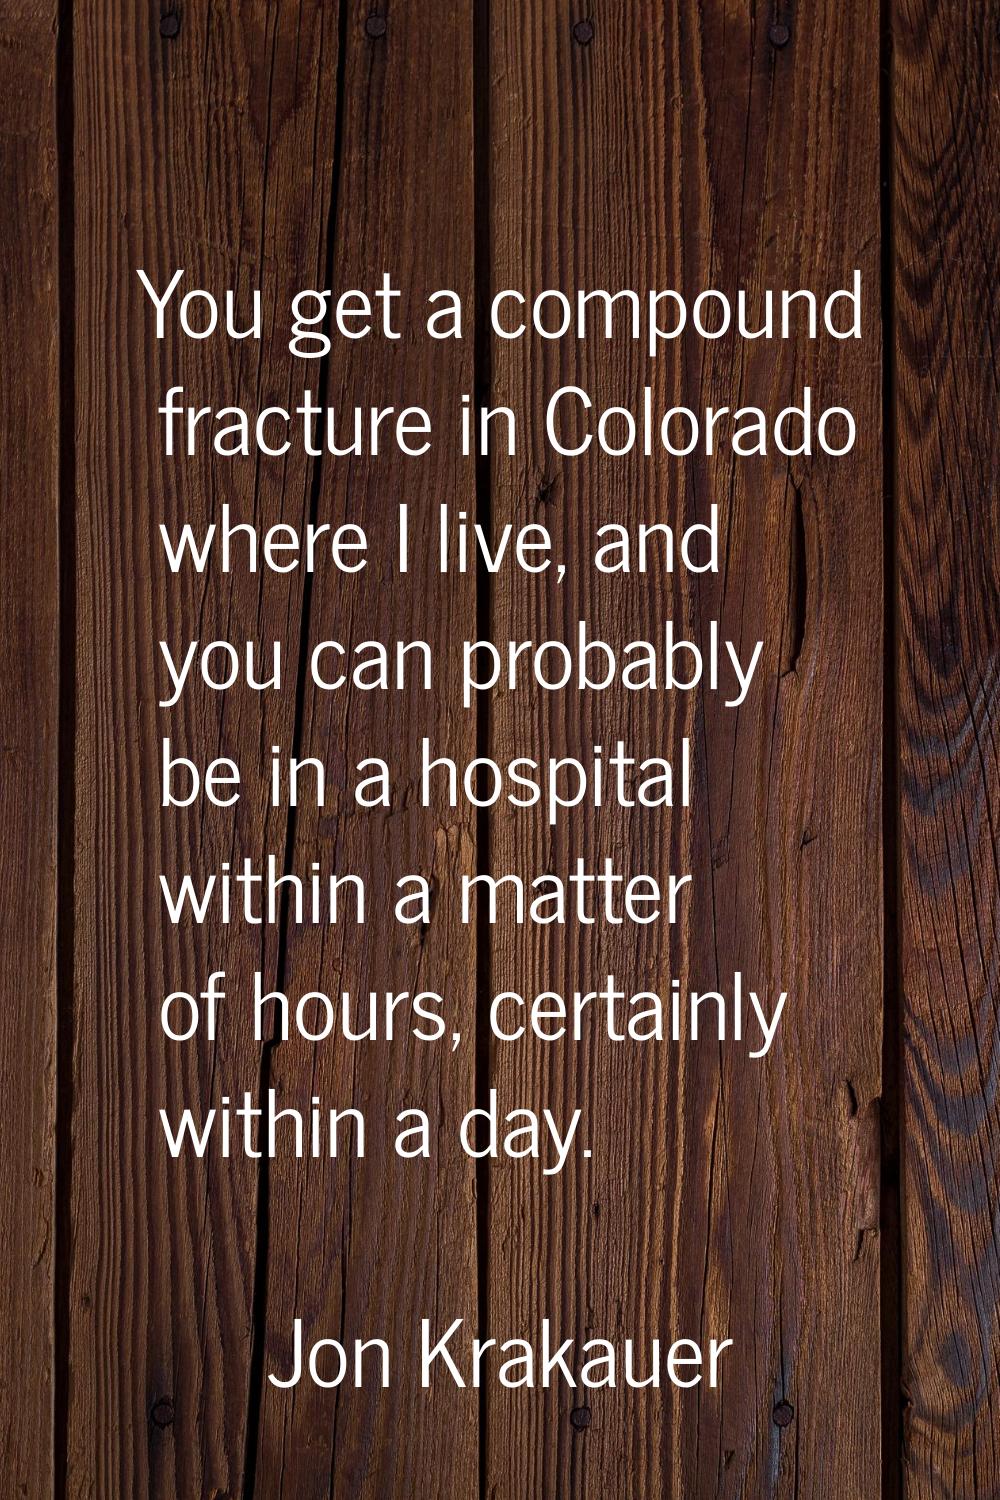 You get a compound fracture in Colorado where I live, and you can probably be in a hospital within 